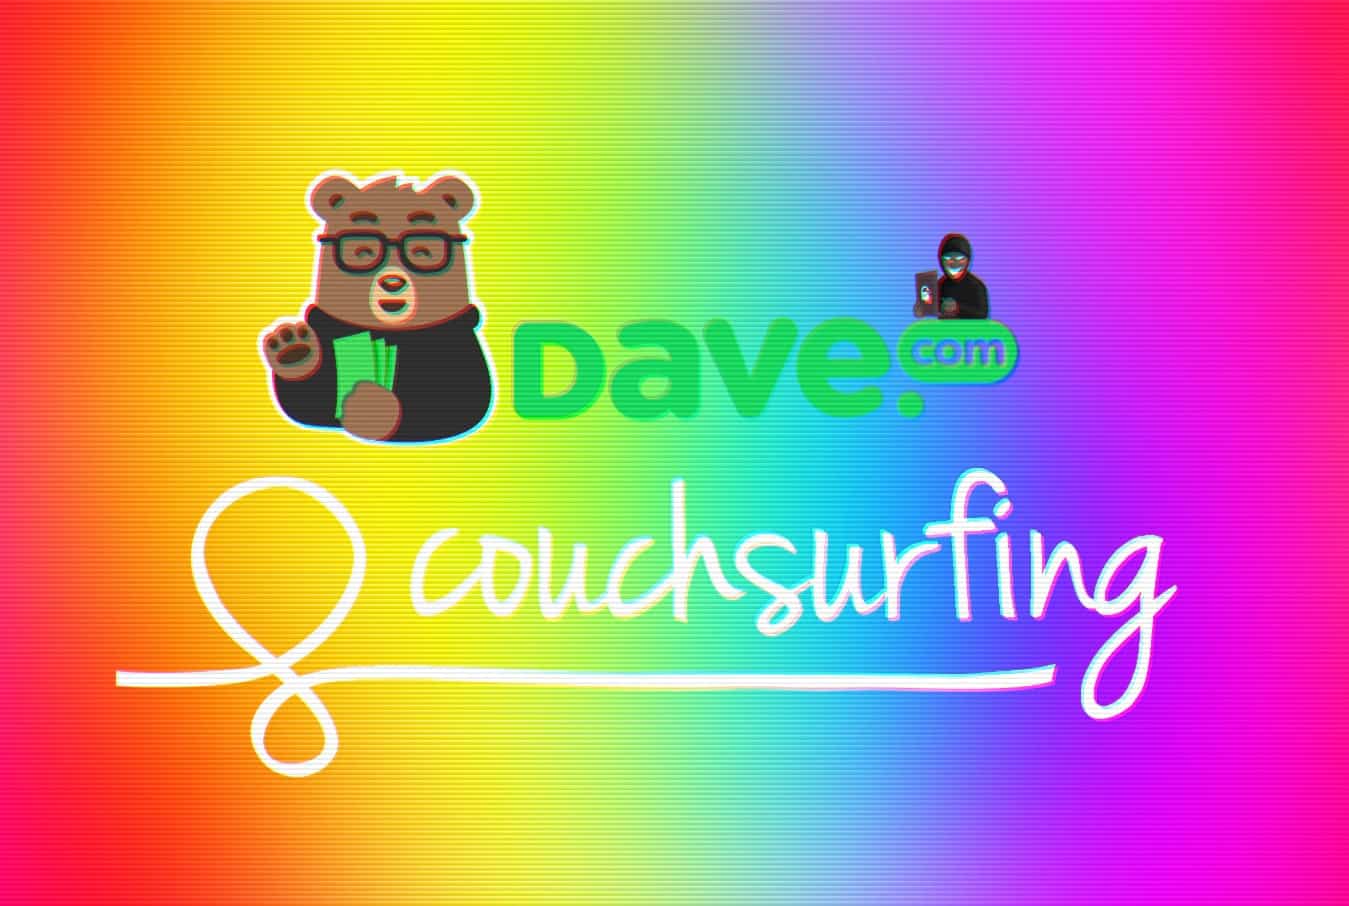 Hackers leak 7m Dave.com accounts; 17m Couchsurfing accounts for sale